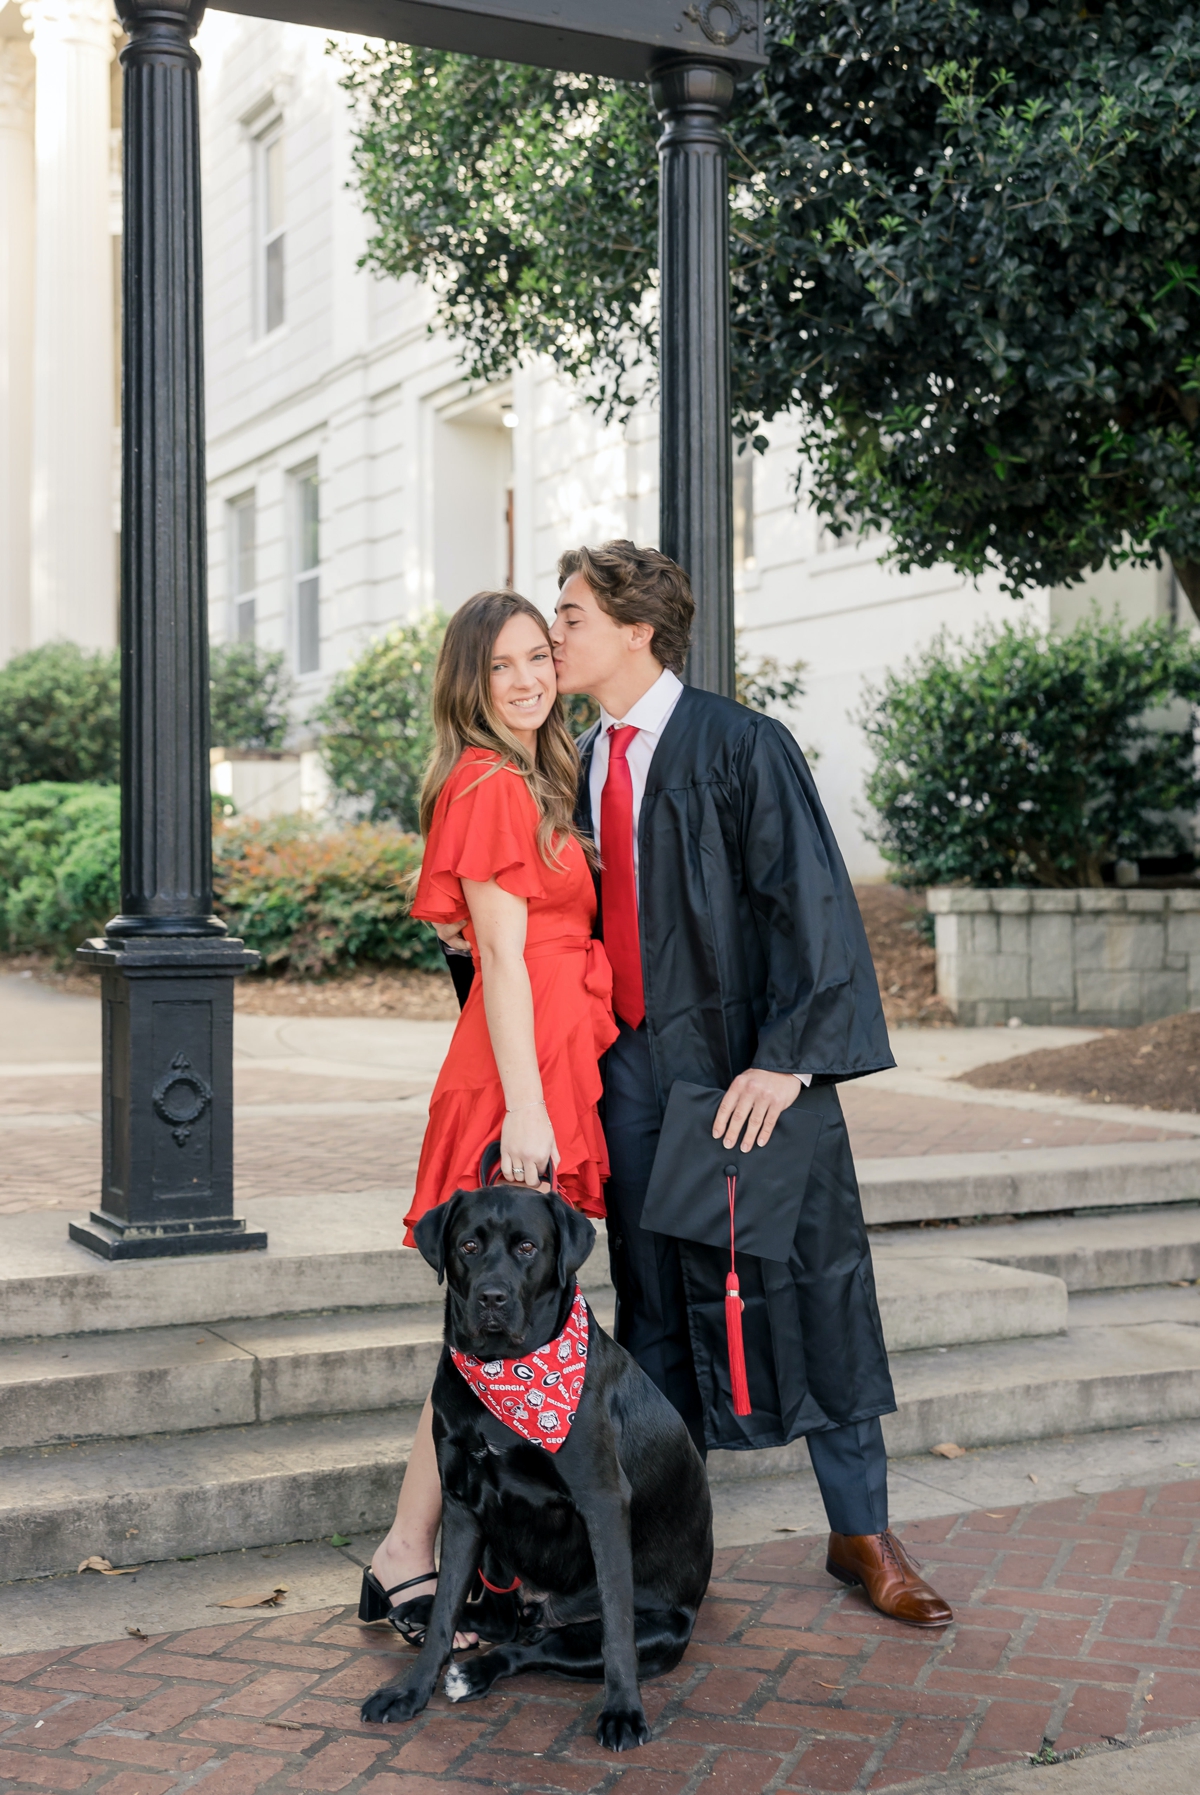 A man kisses his girlfriend on the cheek while dressed in a graduation robe and her holding their dog's leash.